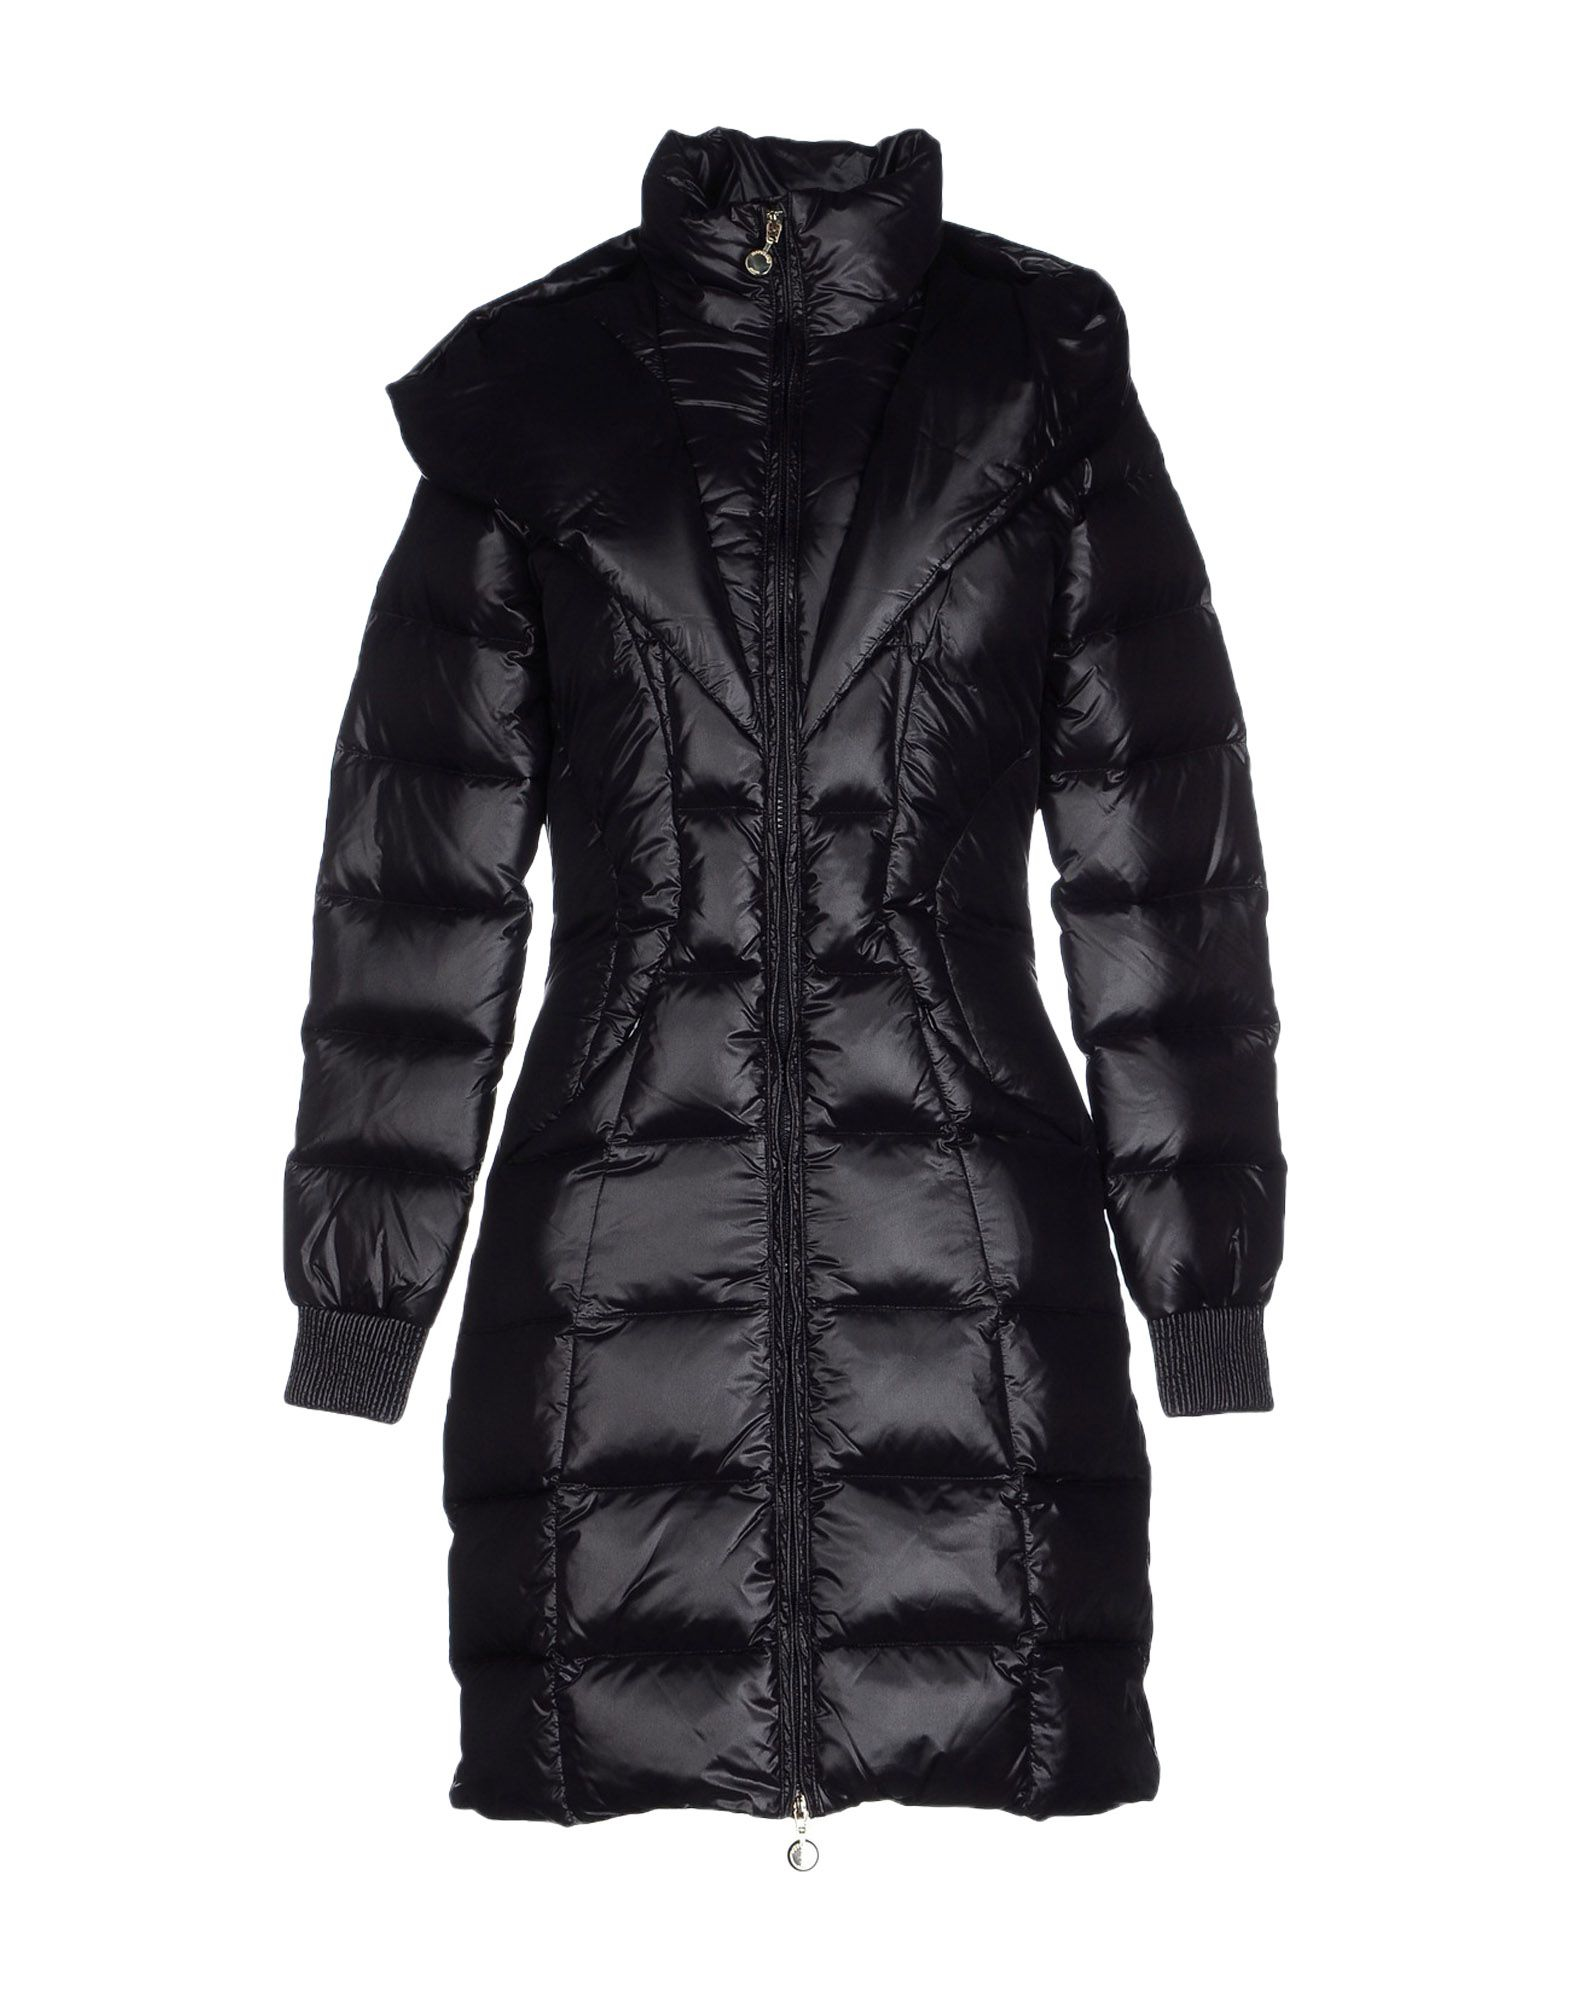 Lyst - Guess Down Jacket in Black